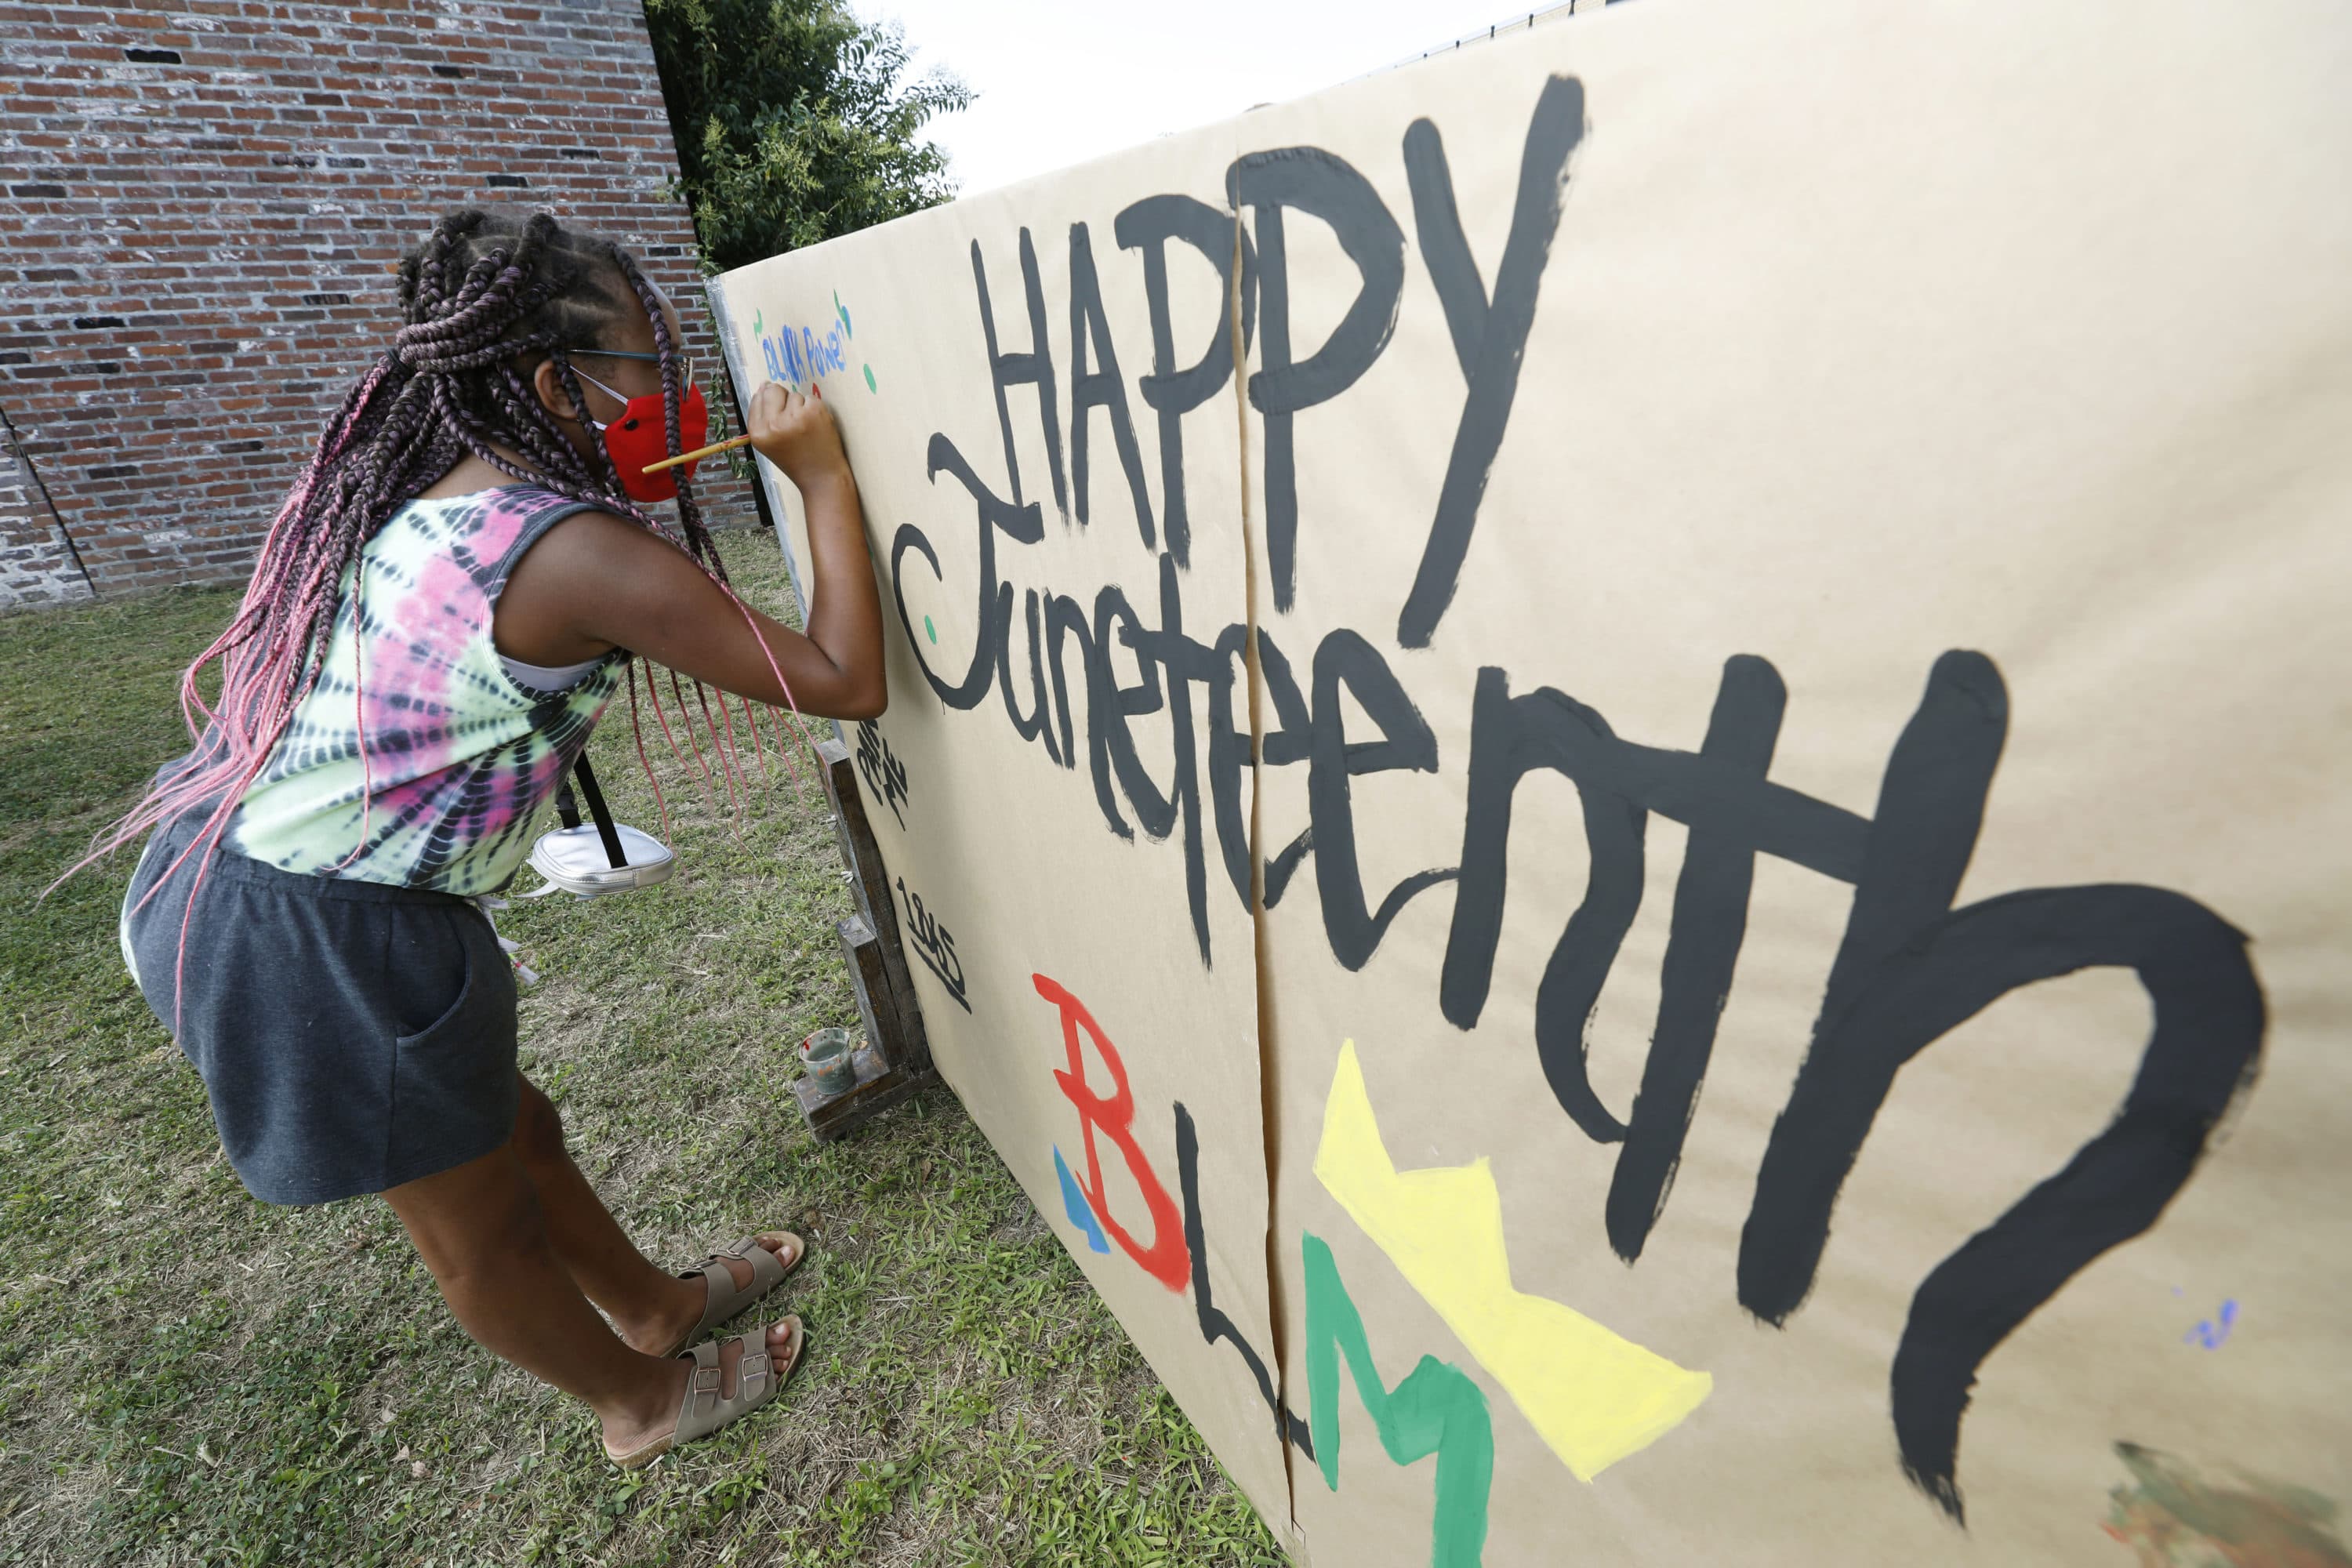 Amya Watson, 11, prints "Black Power," on a poster celebrating Juneteenth during the "Black Joy as Resistance! Juneteenth Celebration" in the historic Farish Street business district in downtown Jackson, Miss., Friday, June 19, 2020. (Rogelio V. Solis/AP)